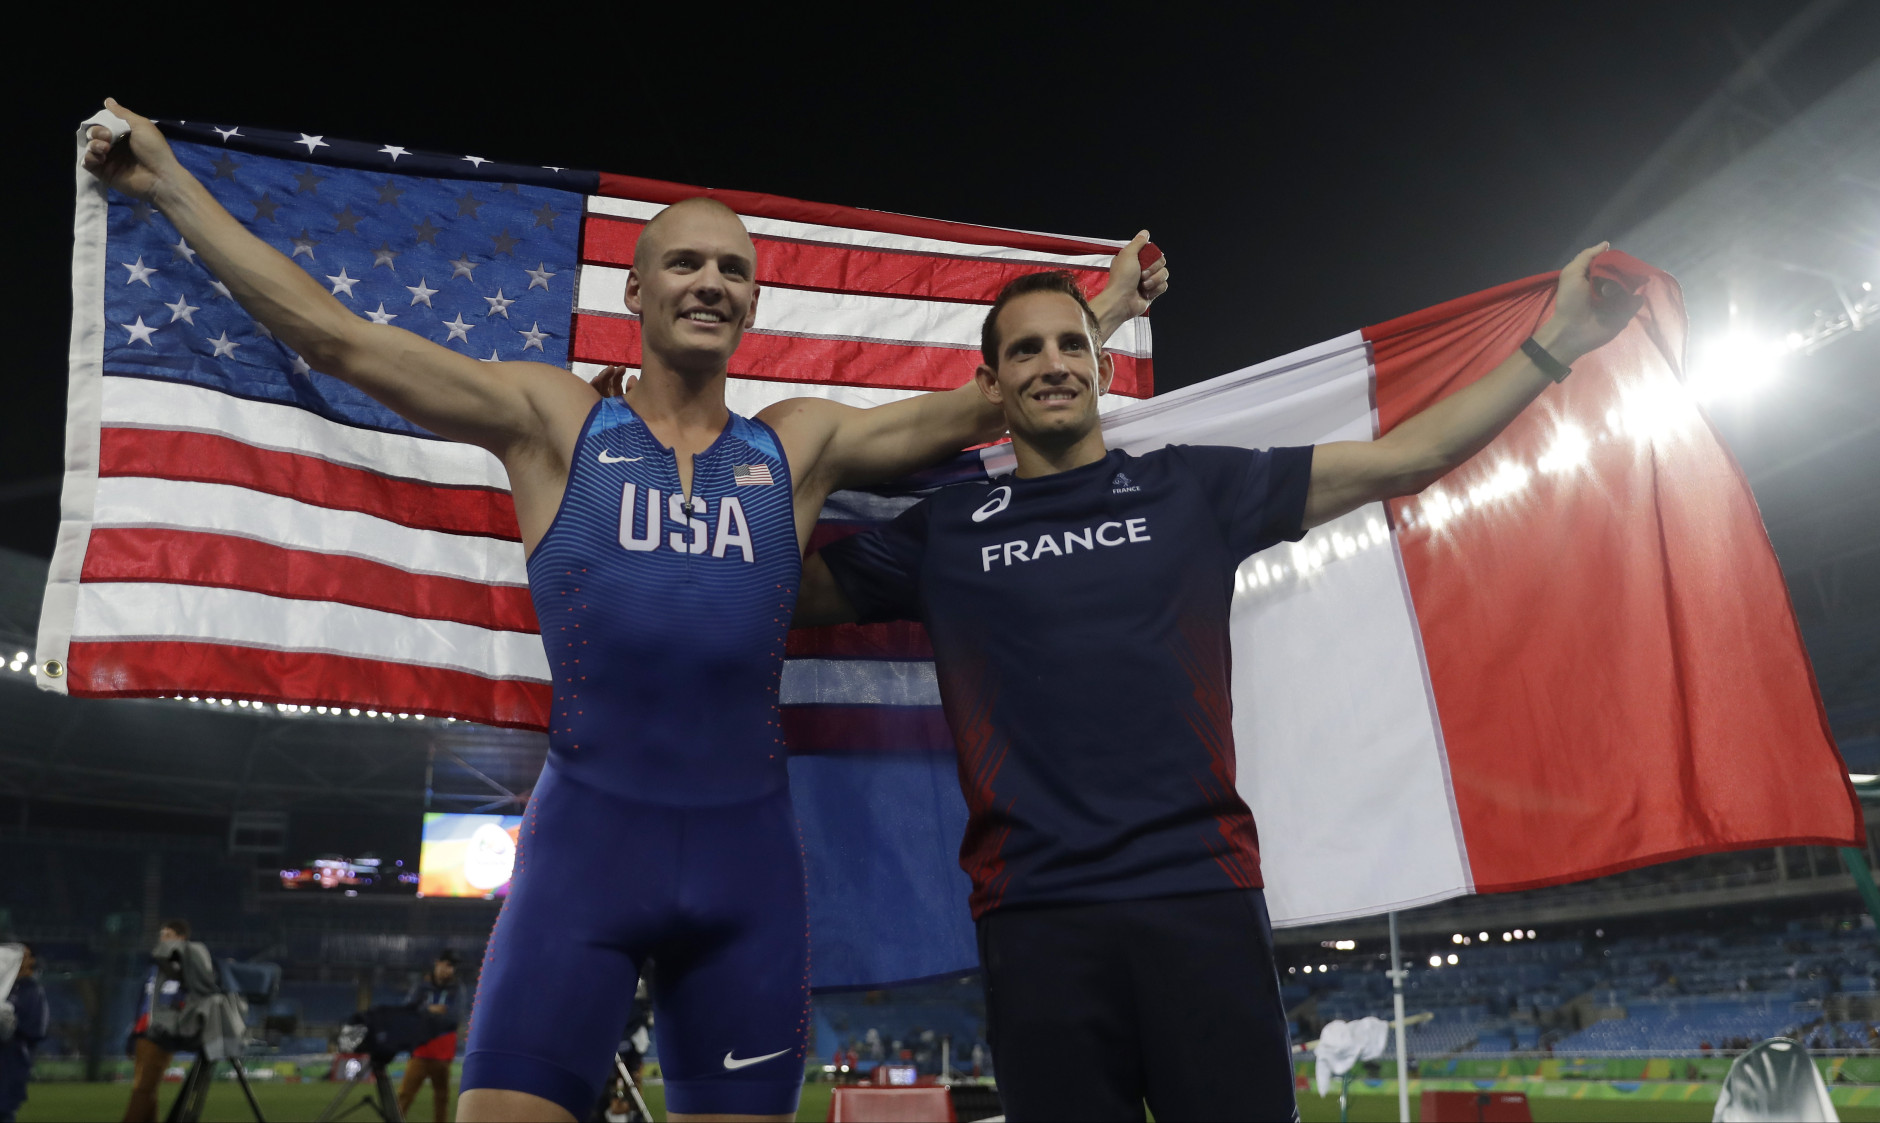 United States' Sam Kendricks and France's Renaud Lavillenie celebrate with their country's flags after the men's pole final, during the athletics competitions of the 2016 Summer Olympics at the Olympic stadium in Rio de Janeiro, Brazil, Tuesday, Aug. 16, 2016. (AP Photo/Matt Dunham)